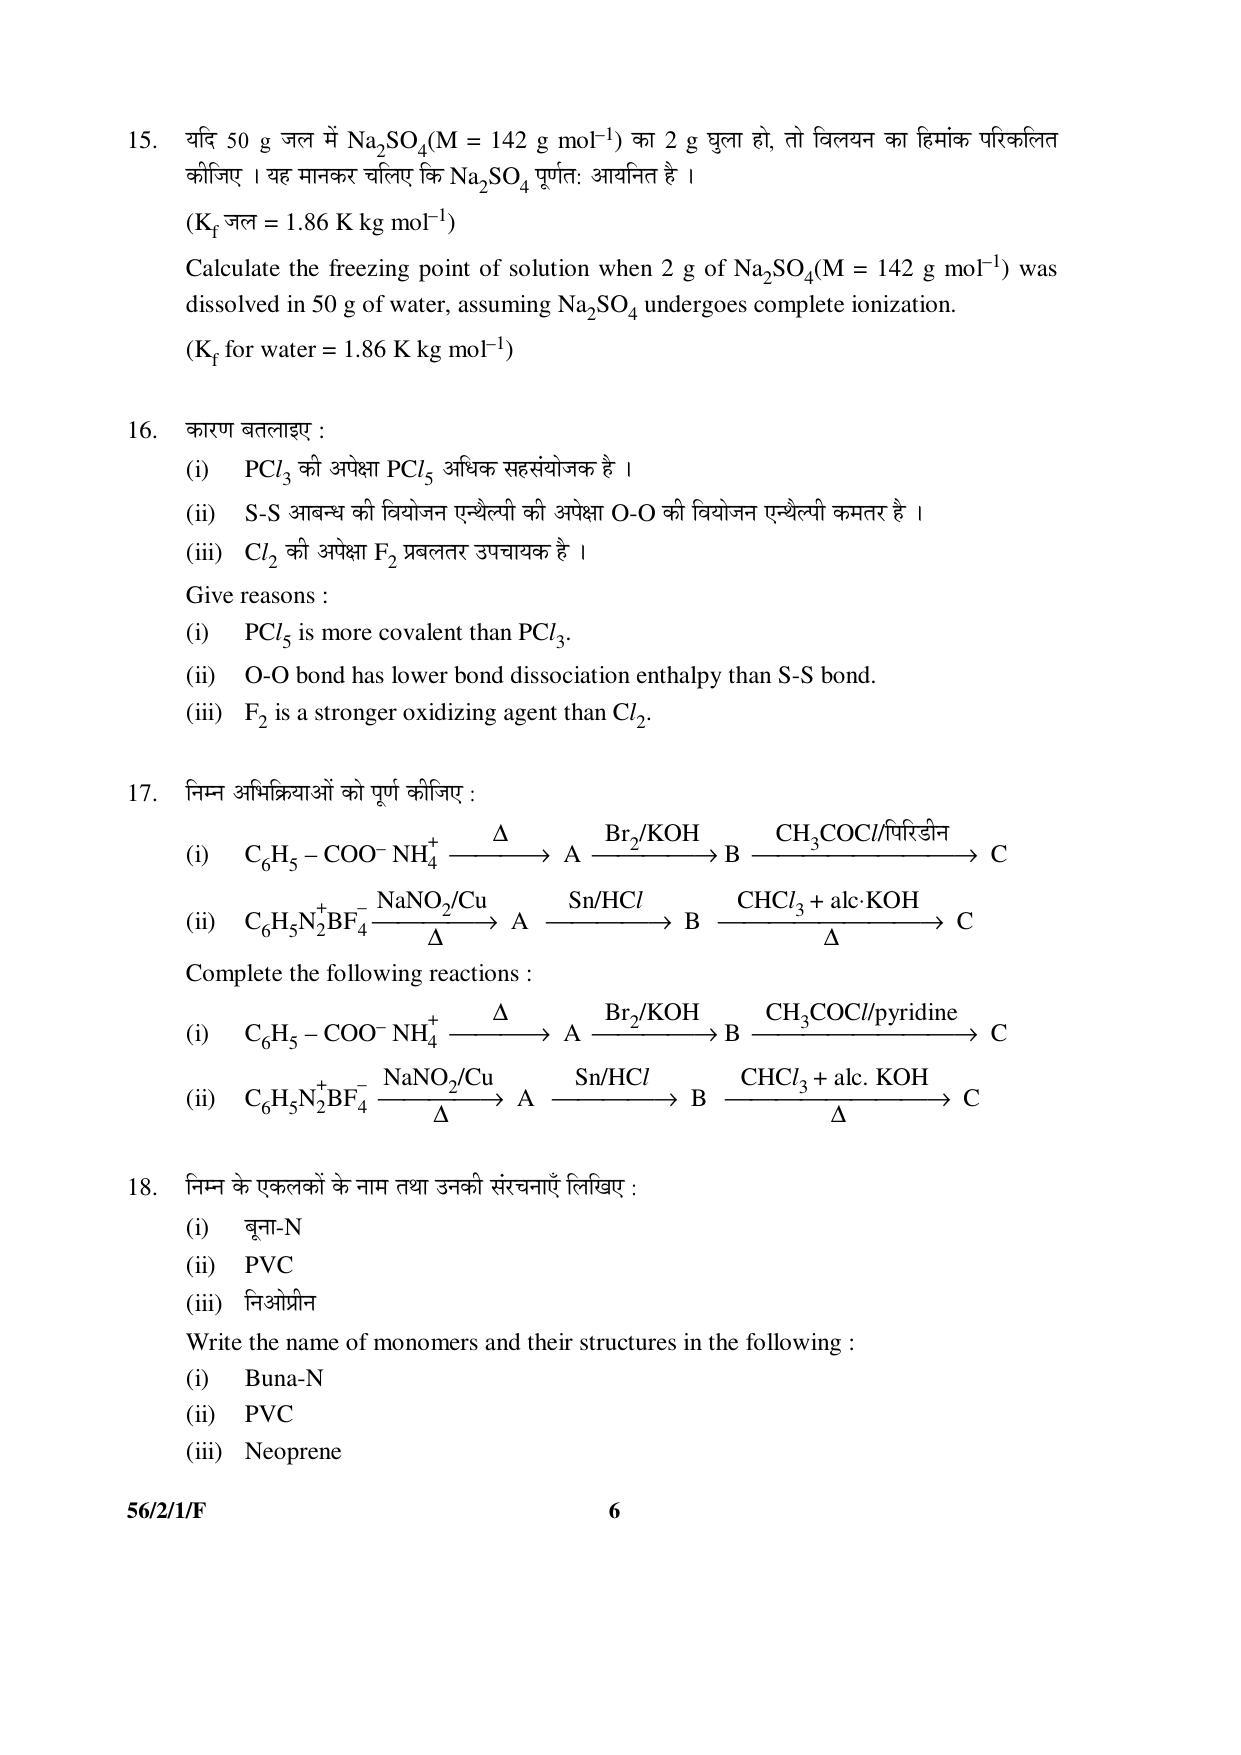 CBSE Class 12 56-2-1-F _Chemistry_ 2016 Question Paper - Page 6